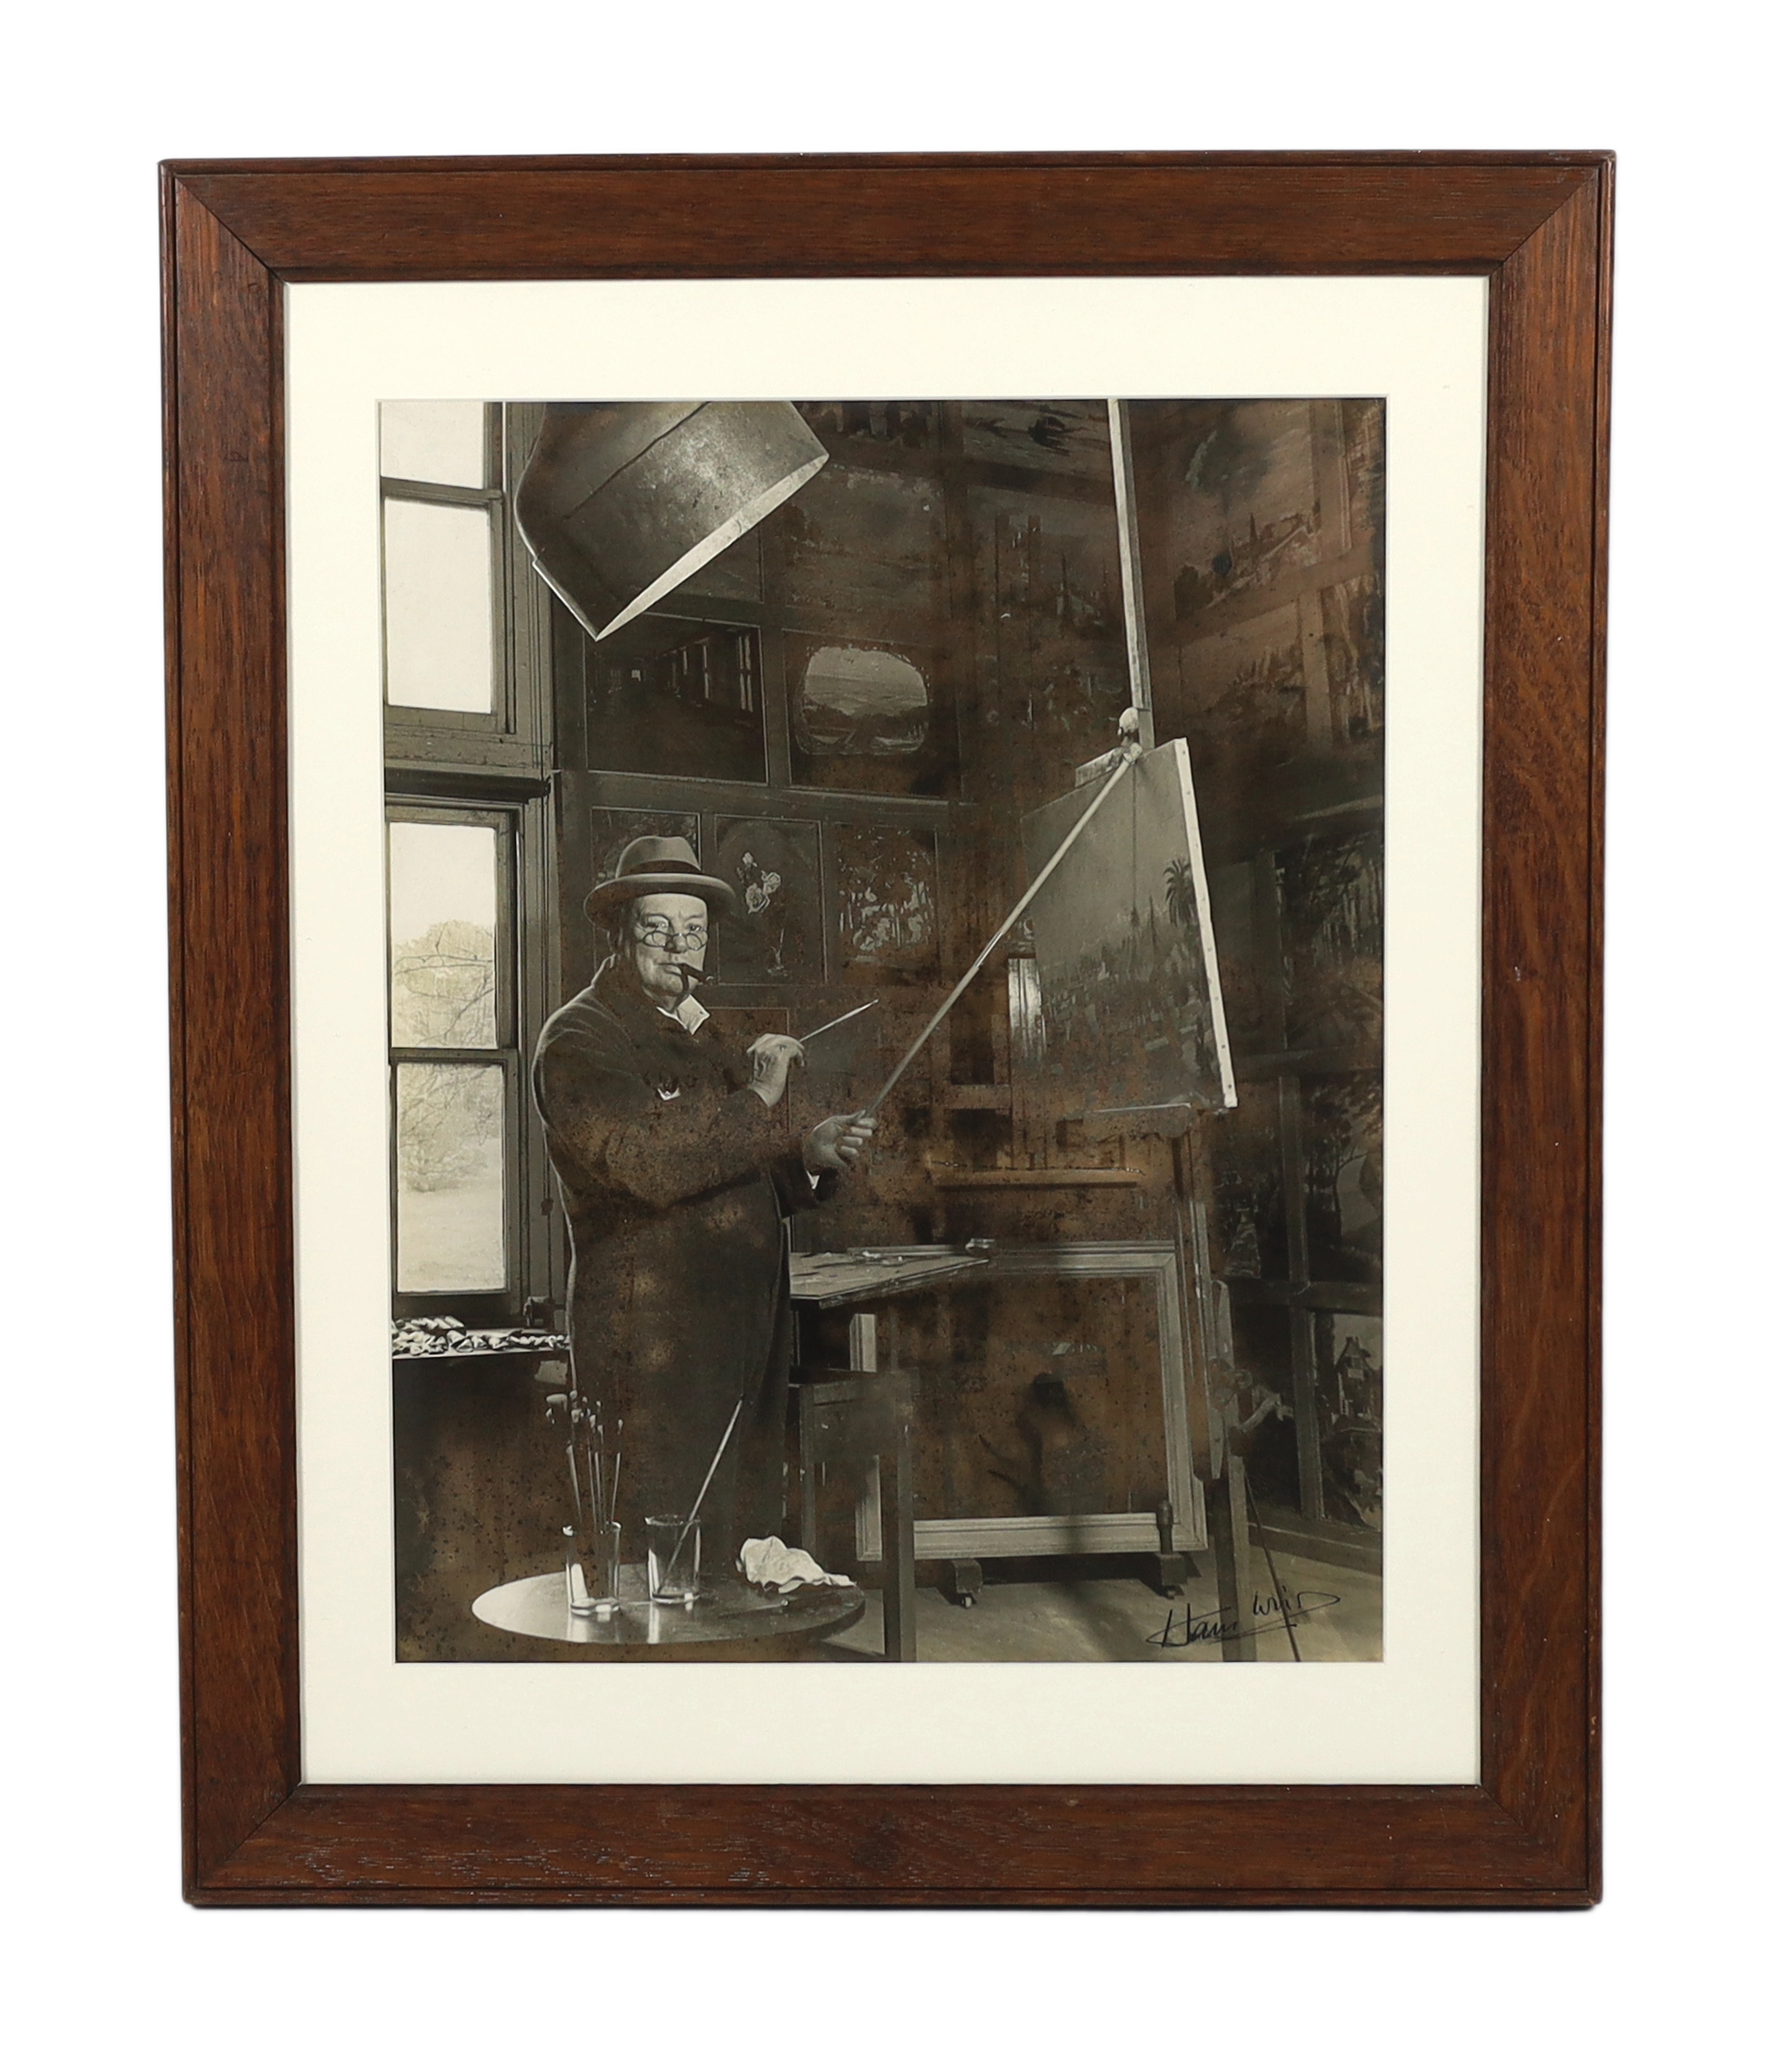 Churchill, Winston S. (1874-1965) - Sir Winston Churchill at his easel in his studio at Chartwell, a black and white photograph